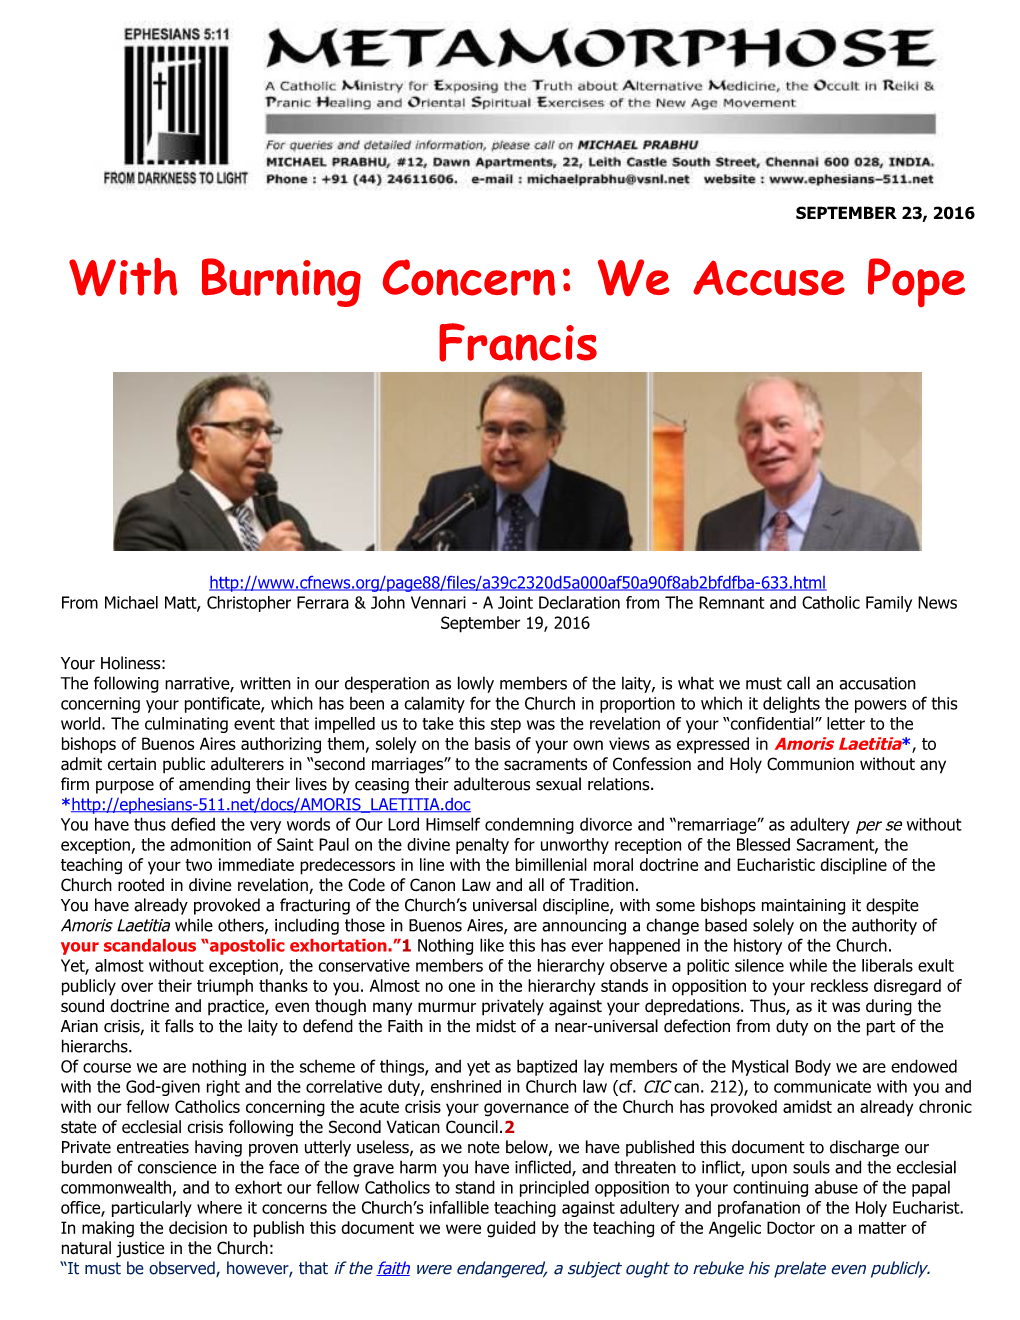 With Burning Concern: We Accuse Pope Francis